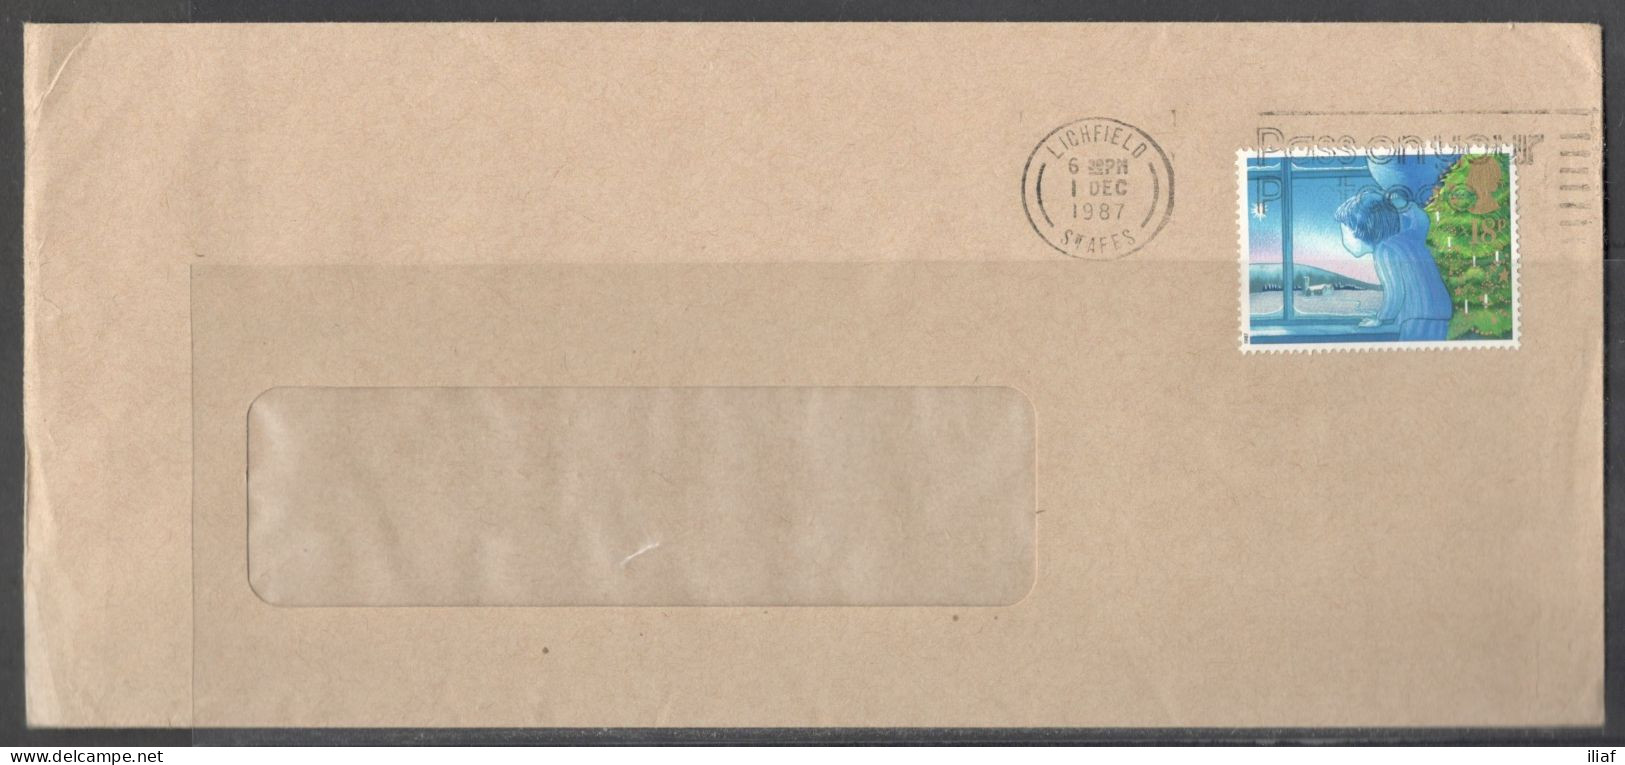 Great Britain - United Kingdom. Stamp Sc. 1197 On Letter, Sent From Lichfield On 1.12.87 - Covers & Documents